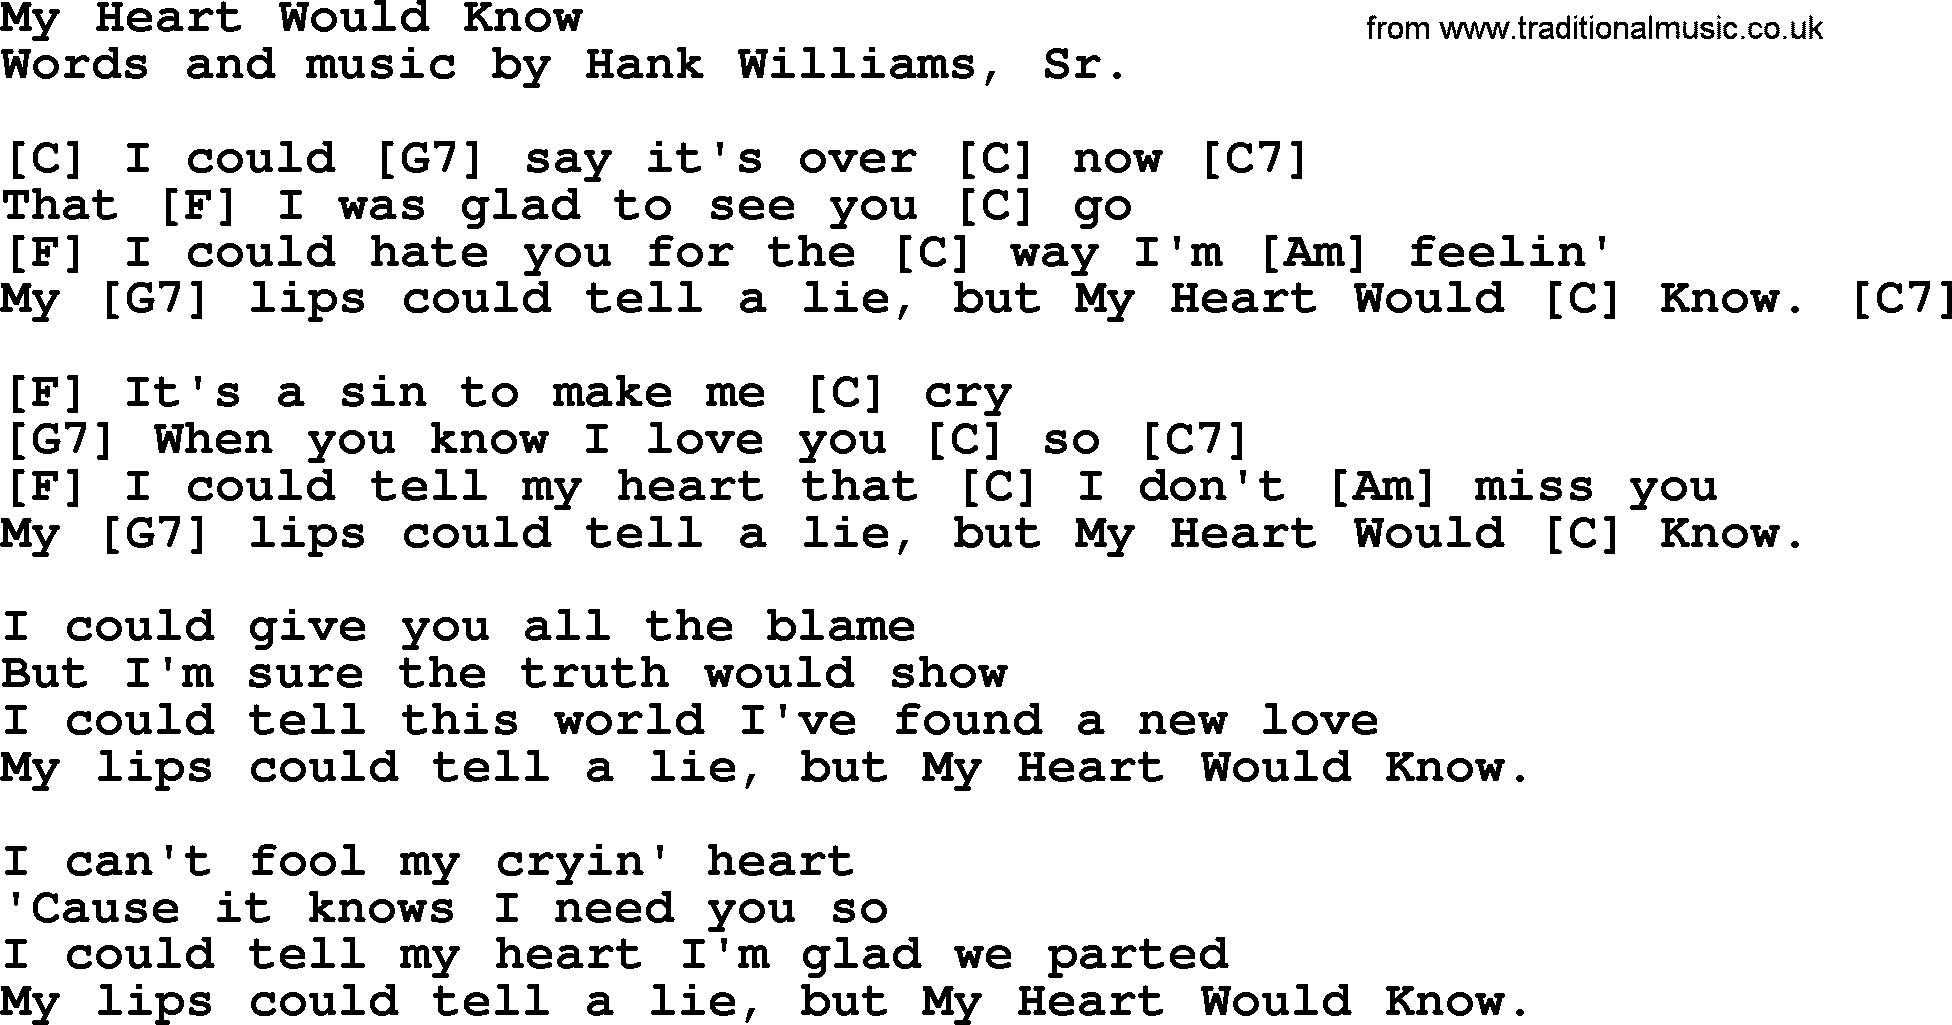 Hank Williams song My Heart Would Know, lyrics and chords